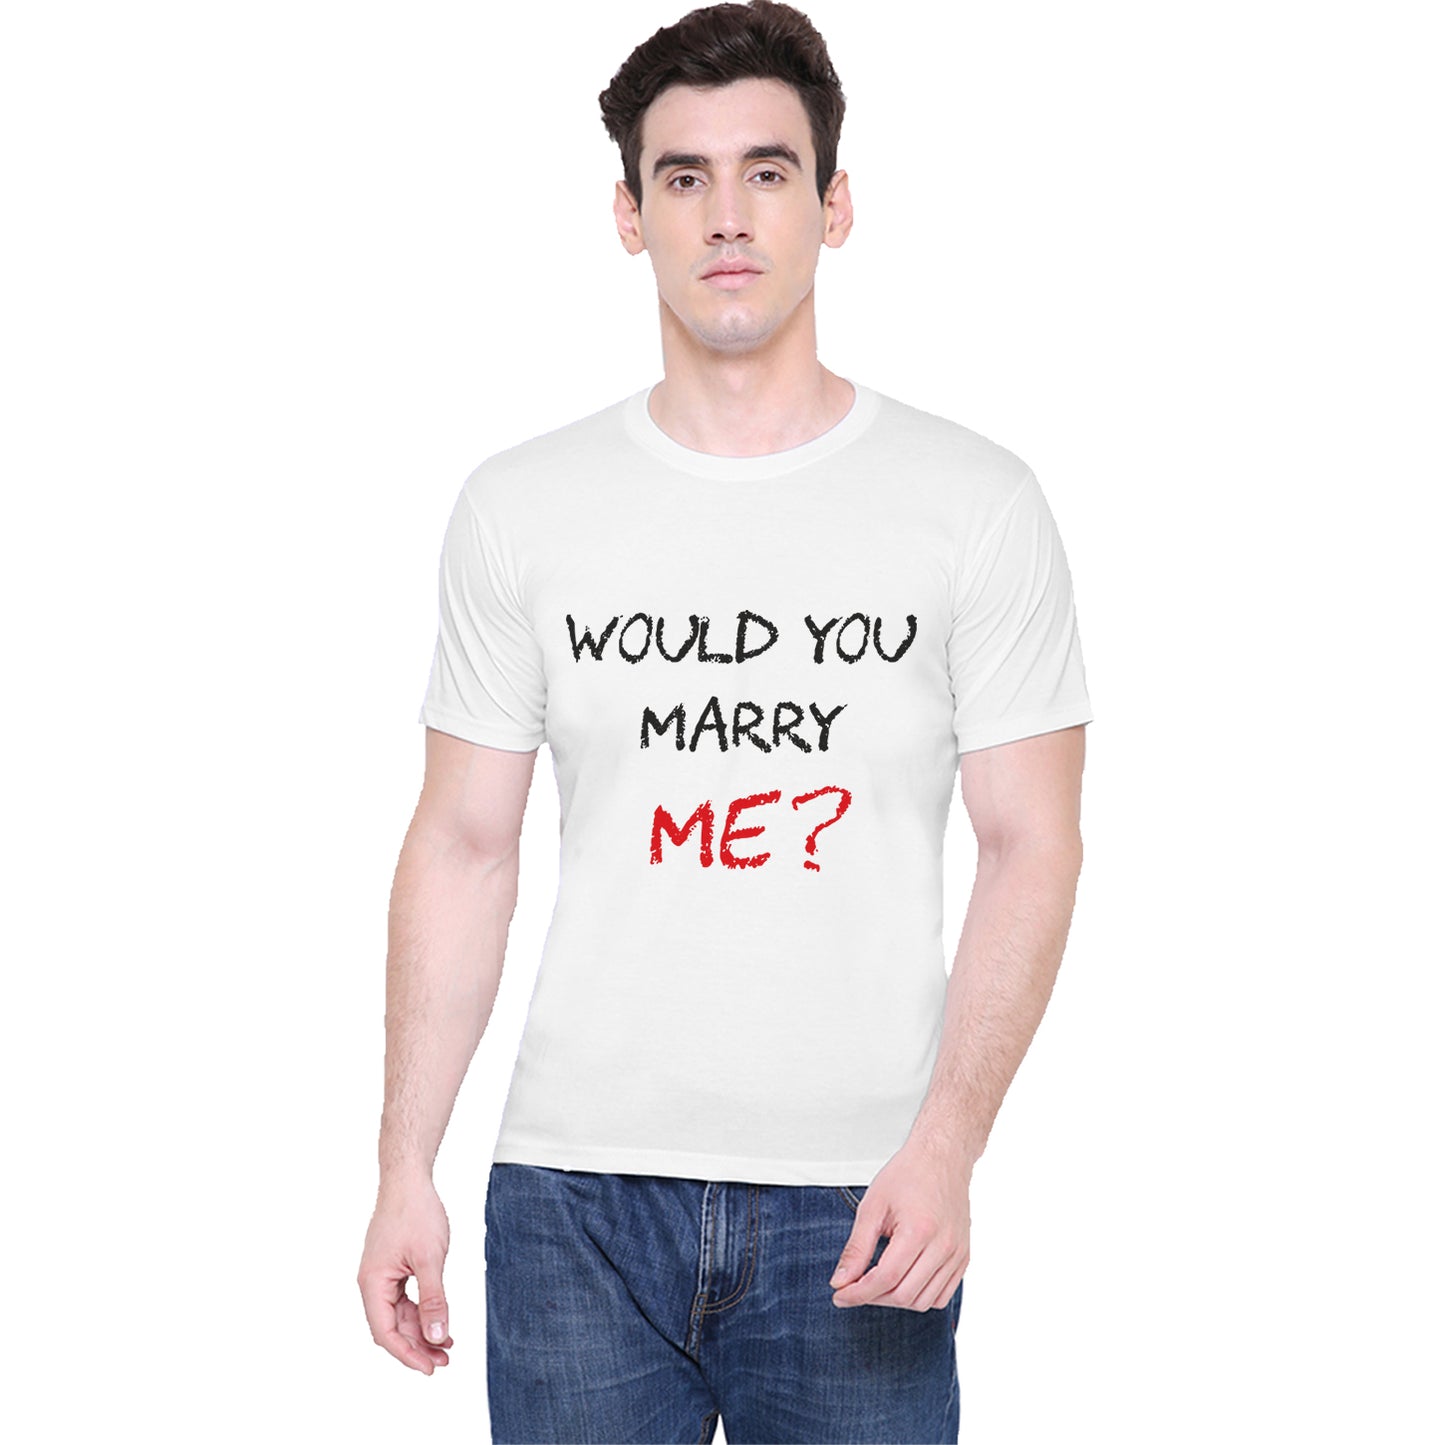 Marry Me matching Couple T shirts- White